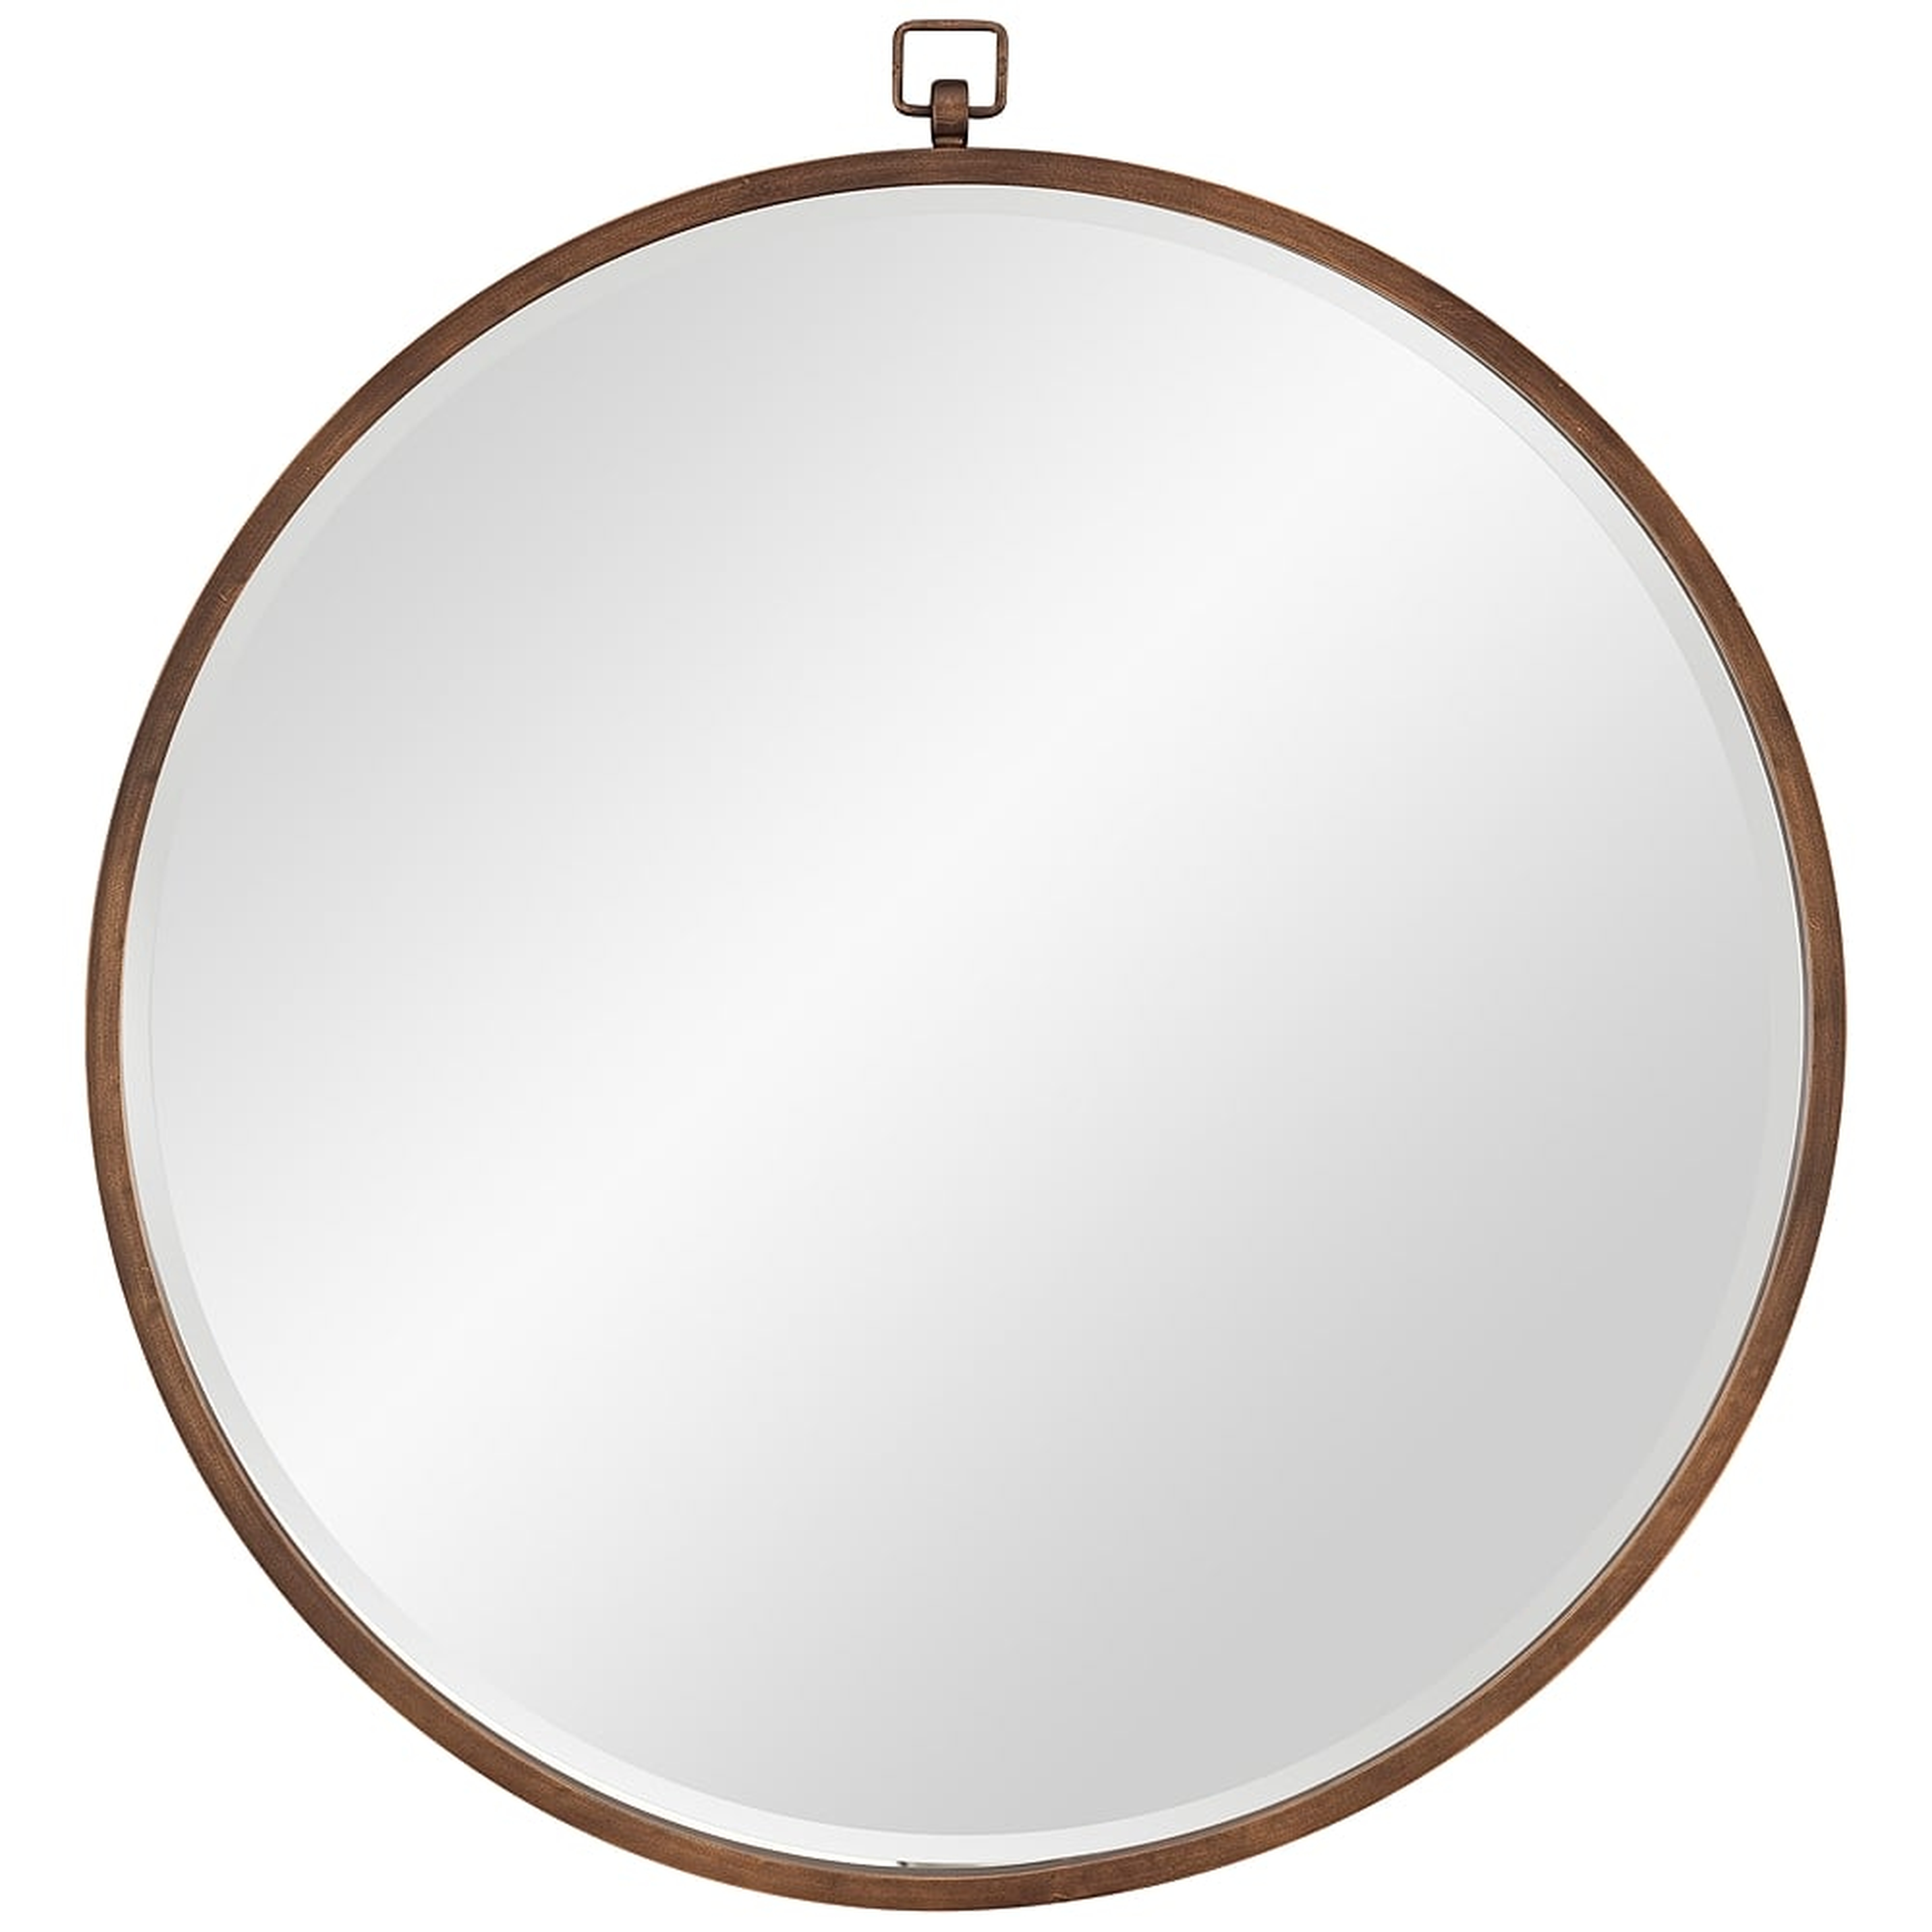 Quinn Antique Bronze 36" Round Wall Mirror - Style # 58K57 - Lamps Plus